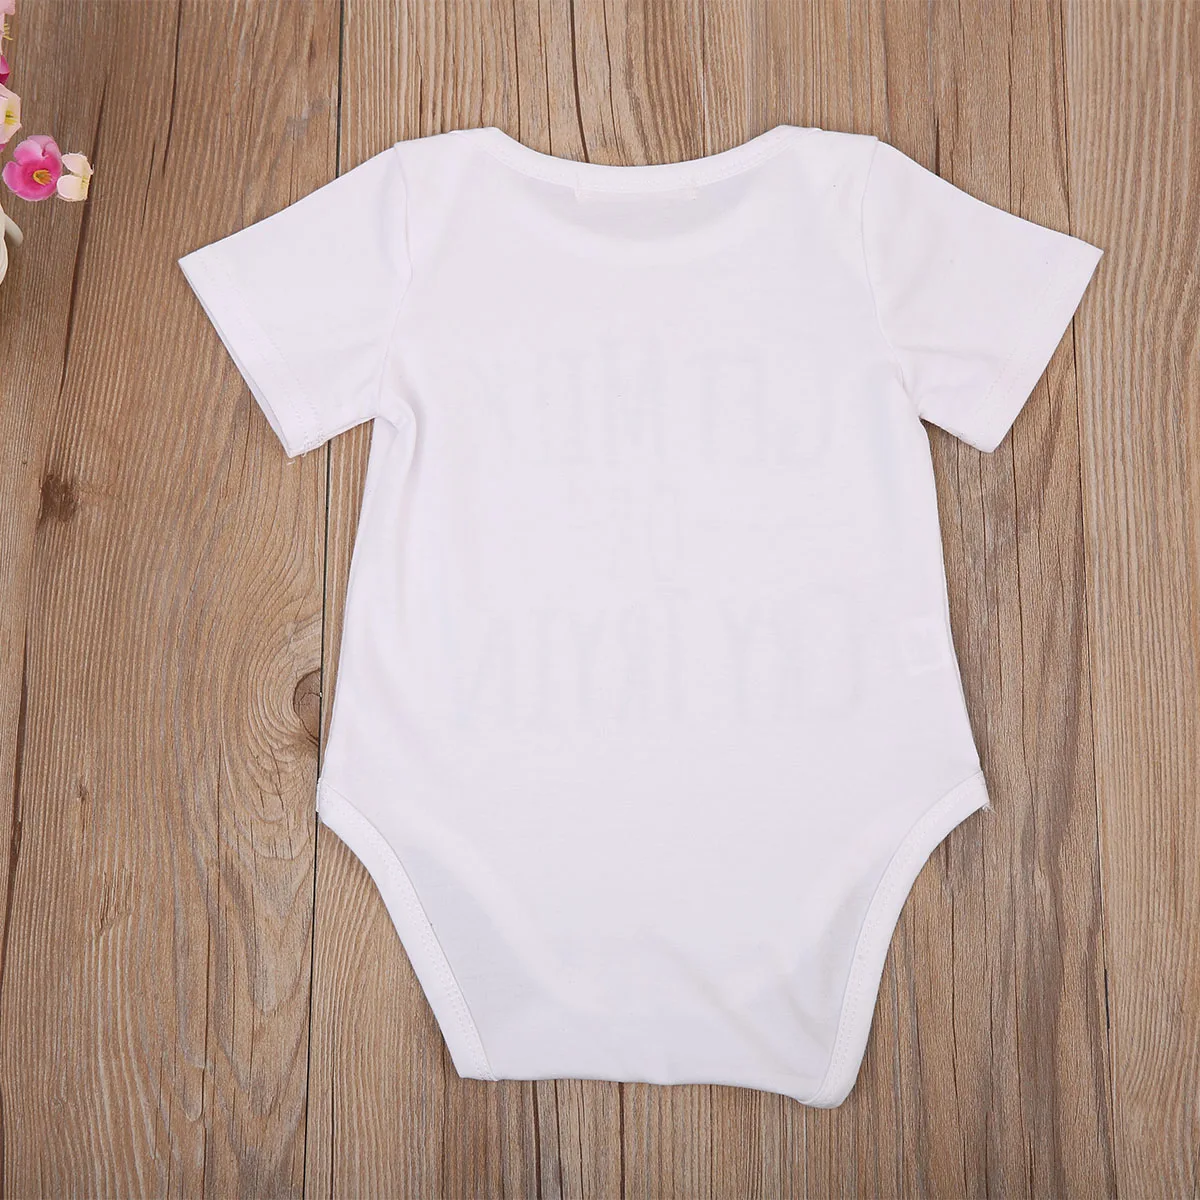 0-18M Newborn Toddler Baby Boy Girl Jumpsuit Short Sleeve Letter Print Romper Outfits Clothes